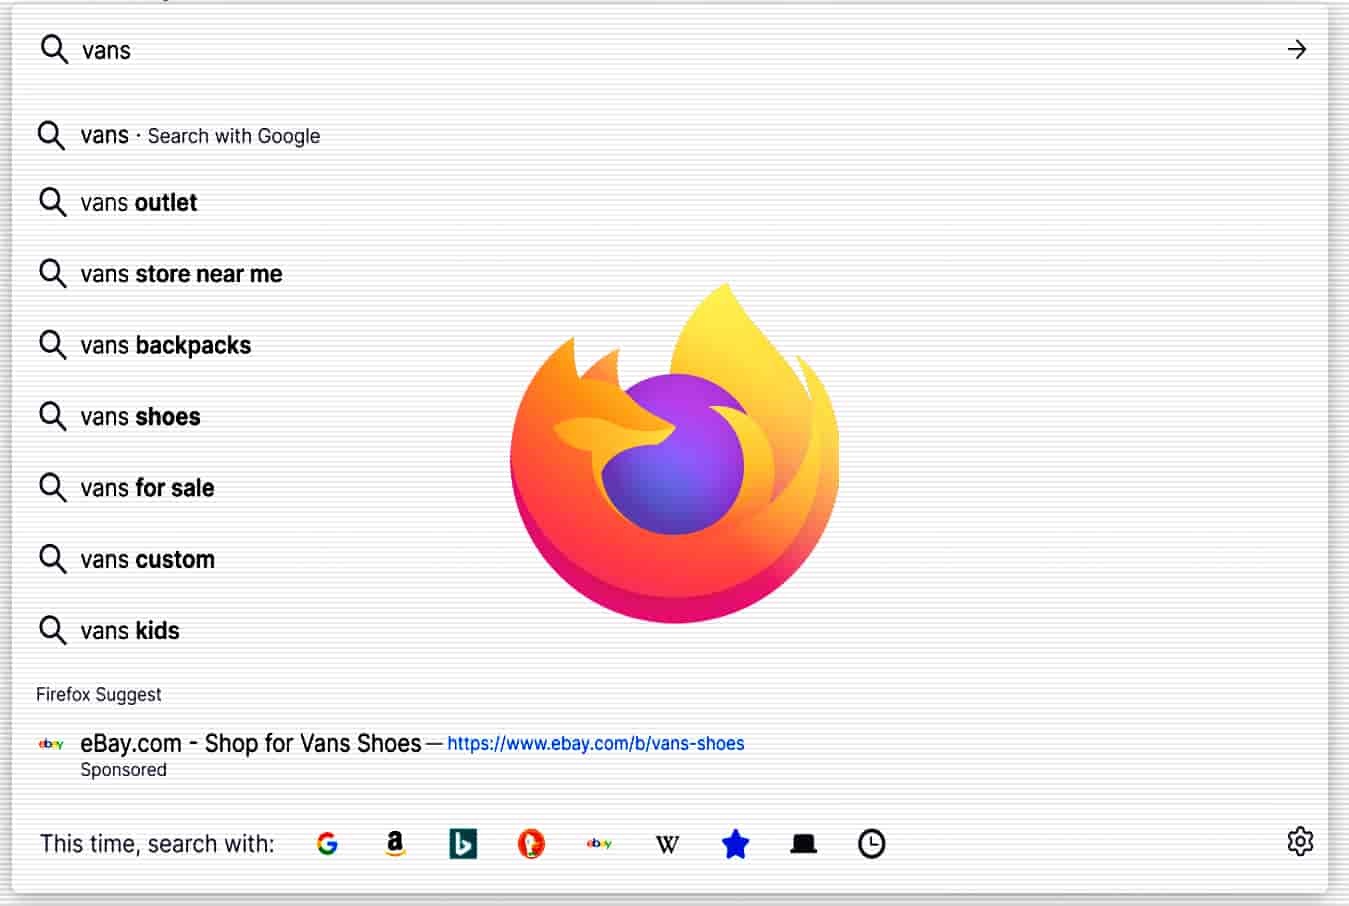 Firefox Suggest to display sponsored ads but users can disable them